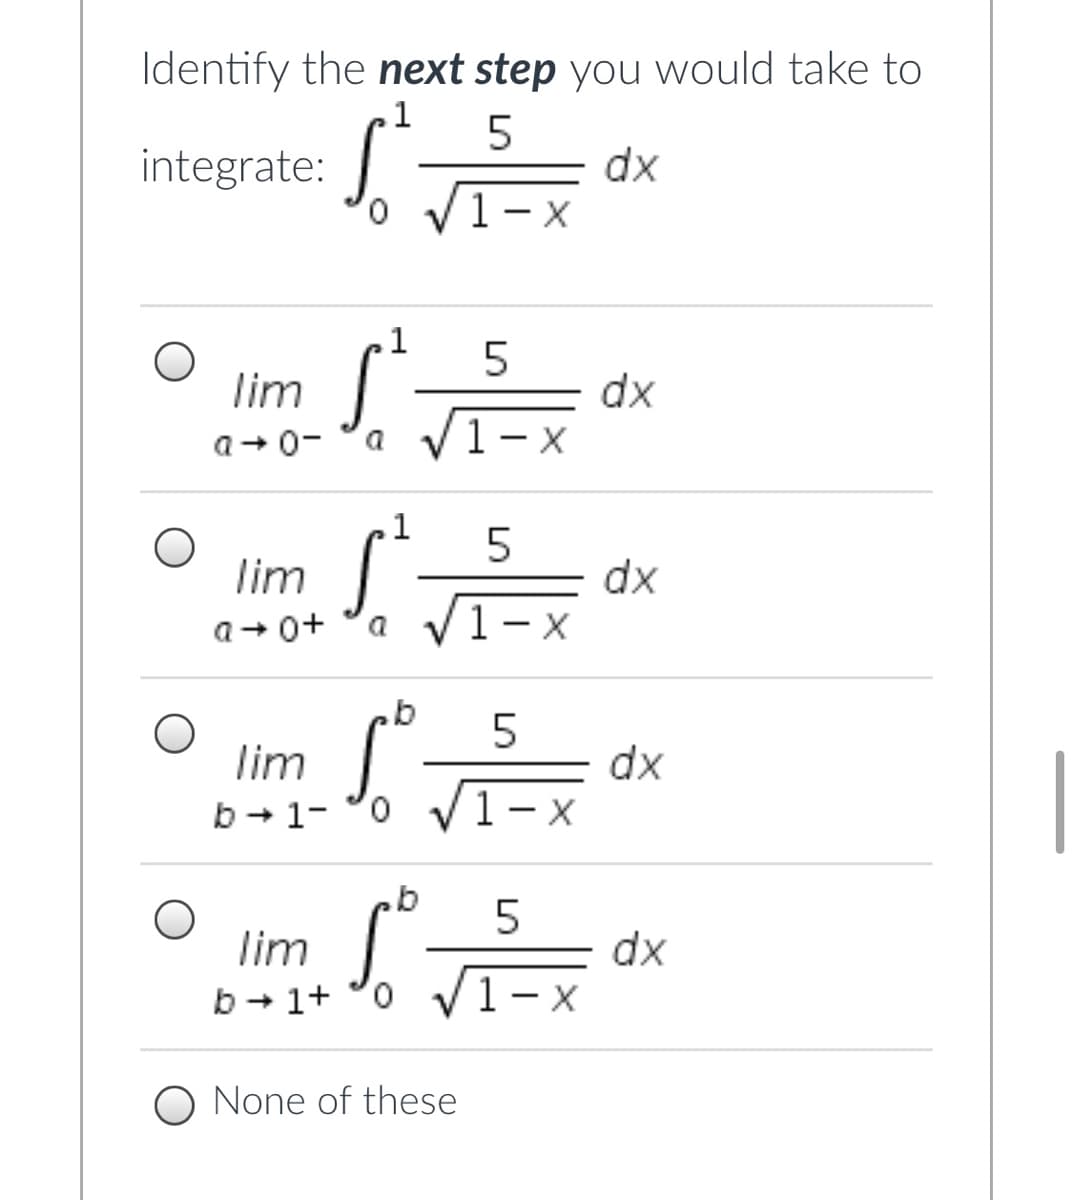 Identify the next step you would take to
.1
integrate:
0.
dx
VI-
1
lim
dx
a V1-x
a+ 0-
.1
lim
dx
a V1-x
a+ 0+
a
lim
dx
1- x
b + 1-
o v
lim
dx
1- x
b + 1+ °0 V
O None of these
